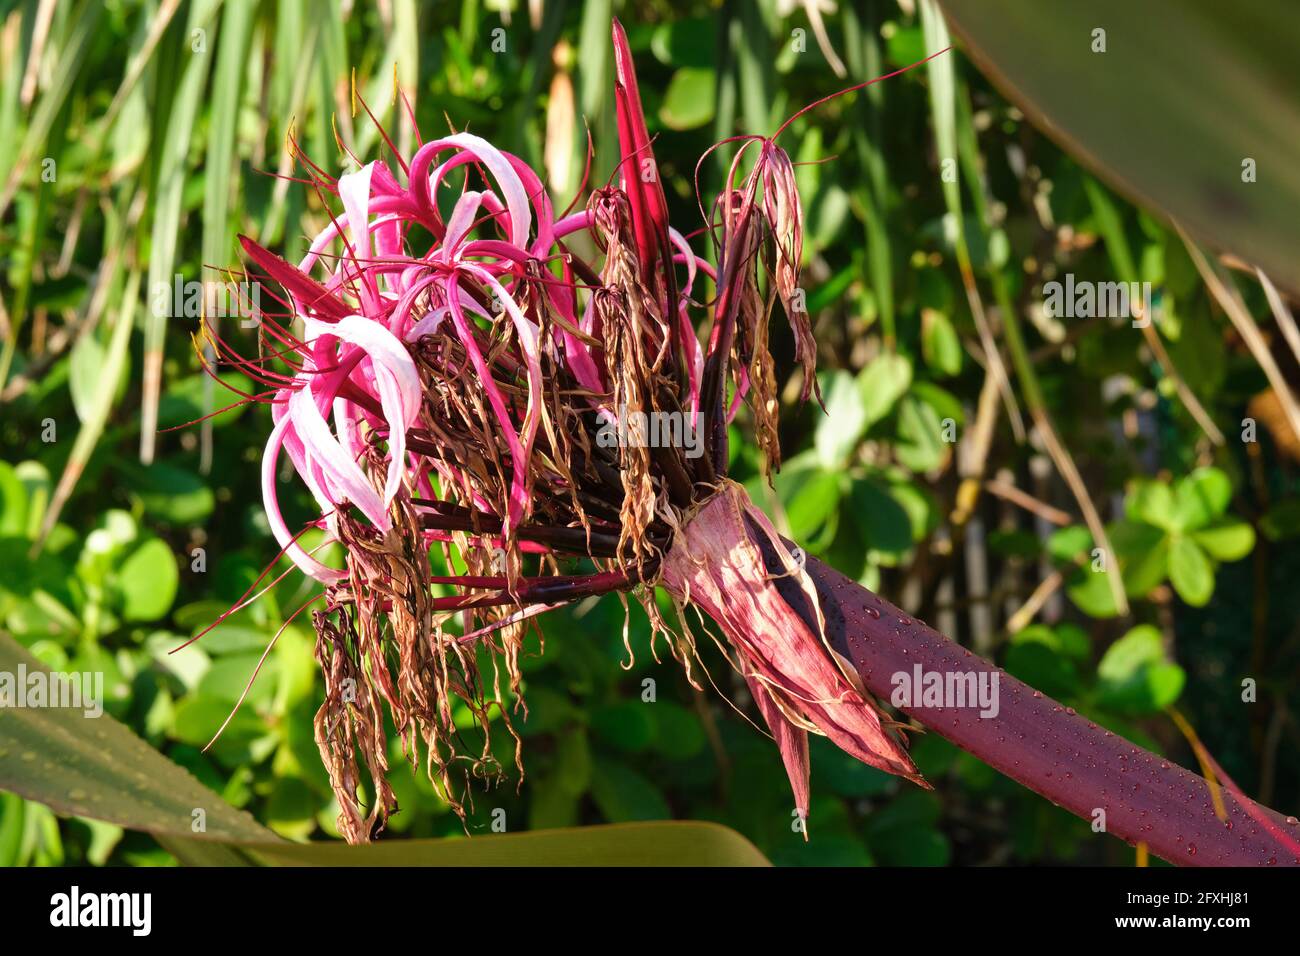 Queen Emma Lily in morning sunlight Stock Photo